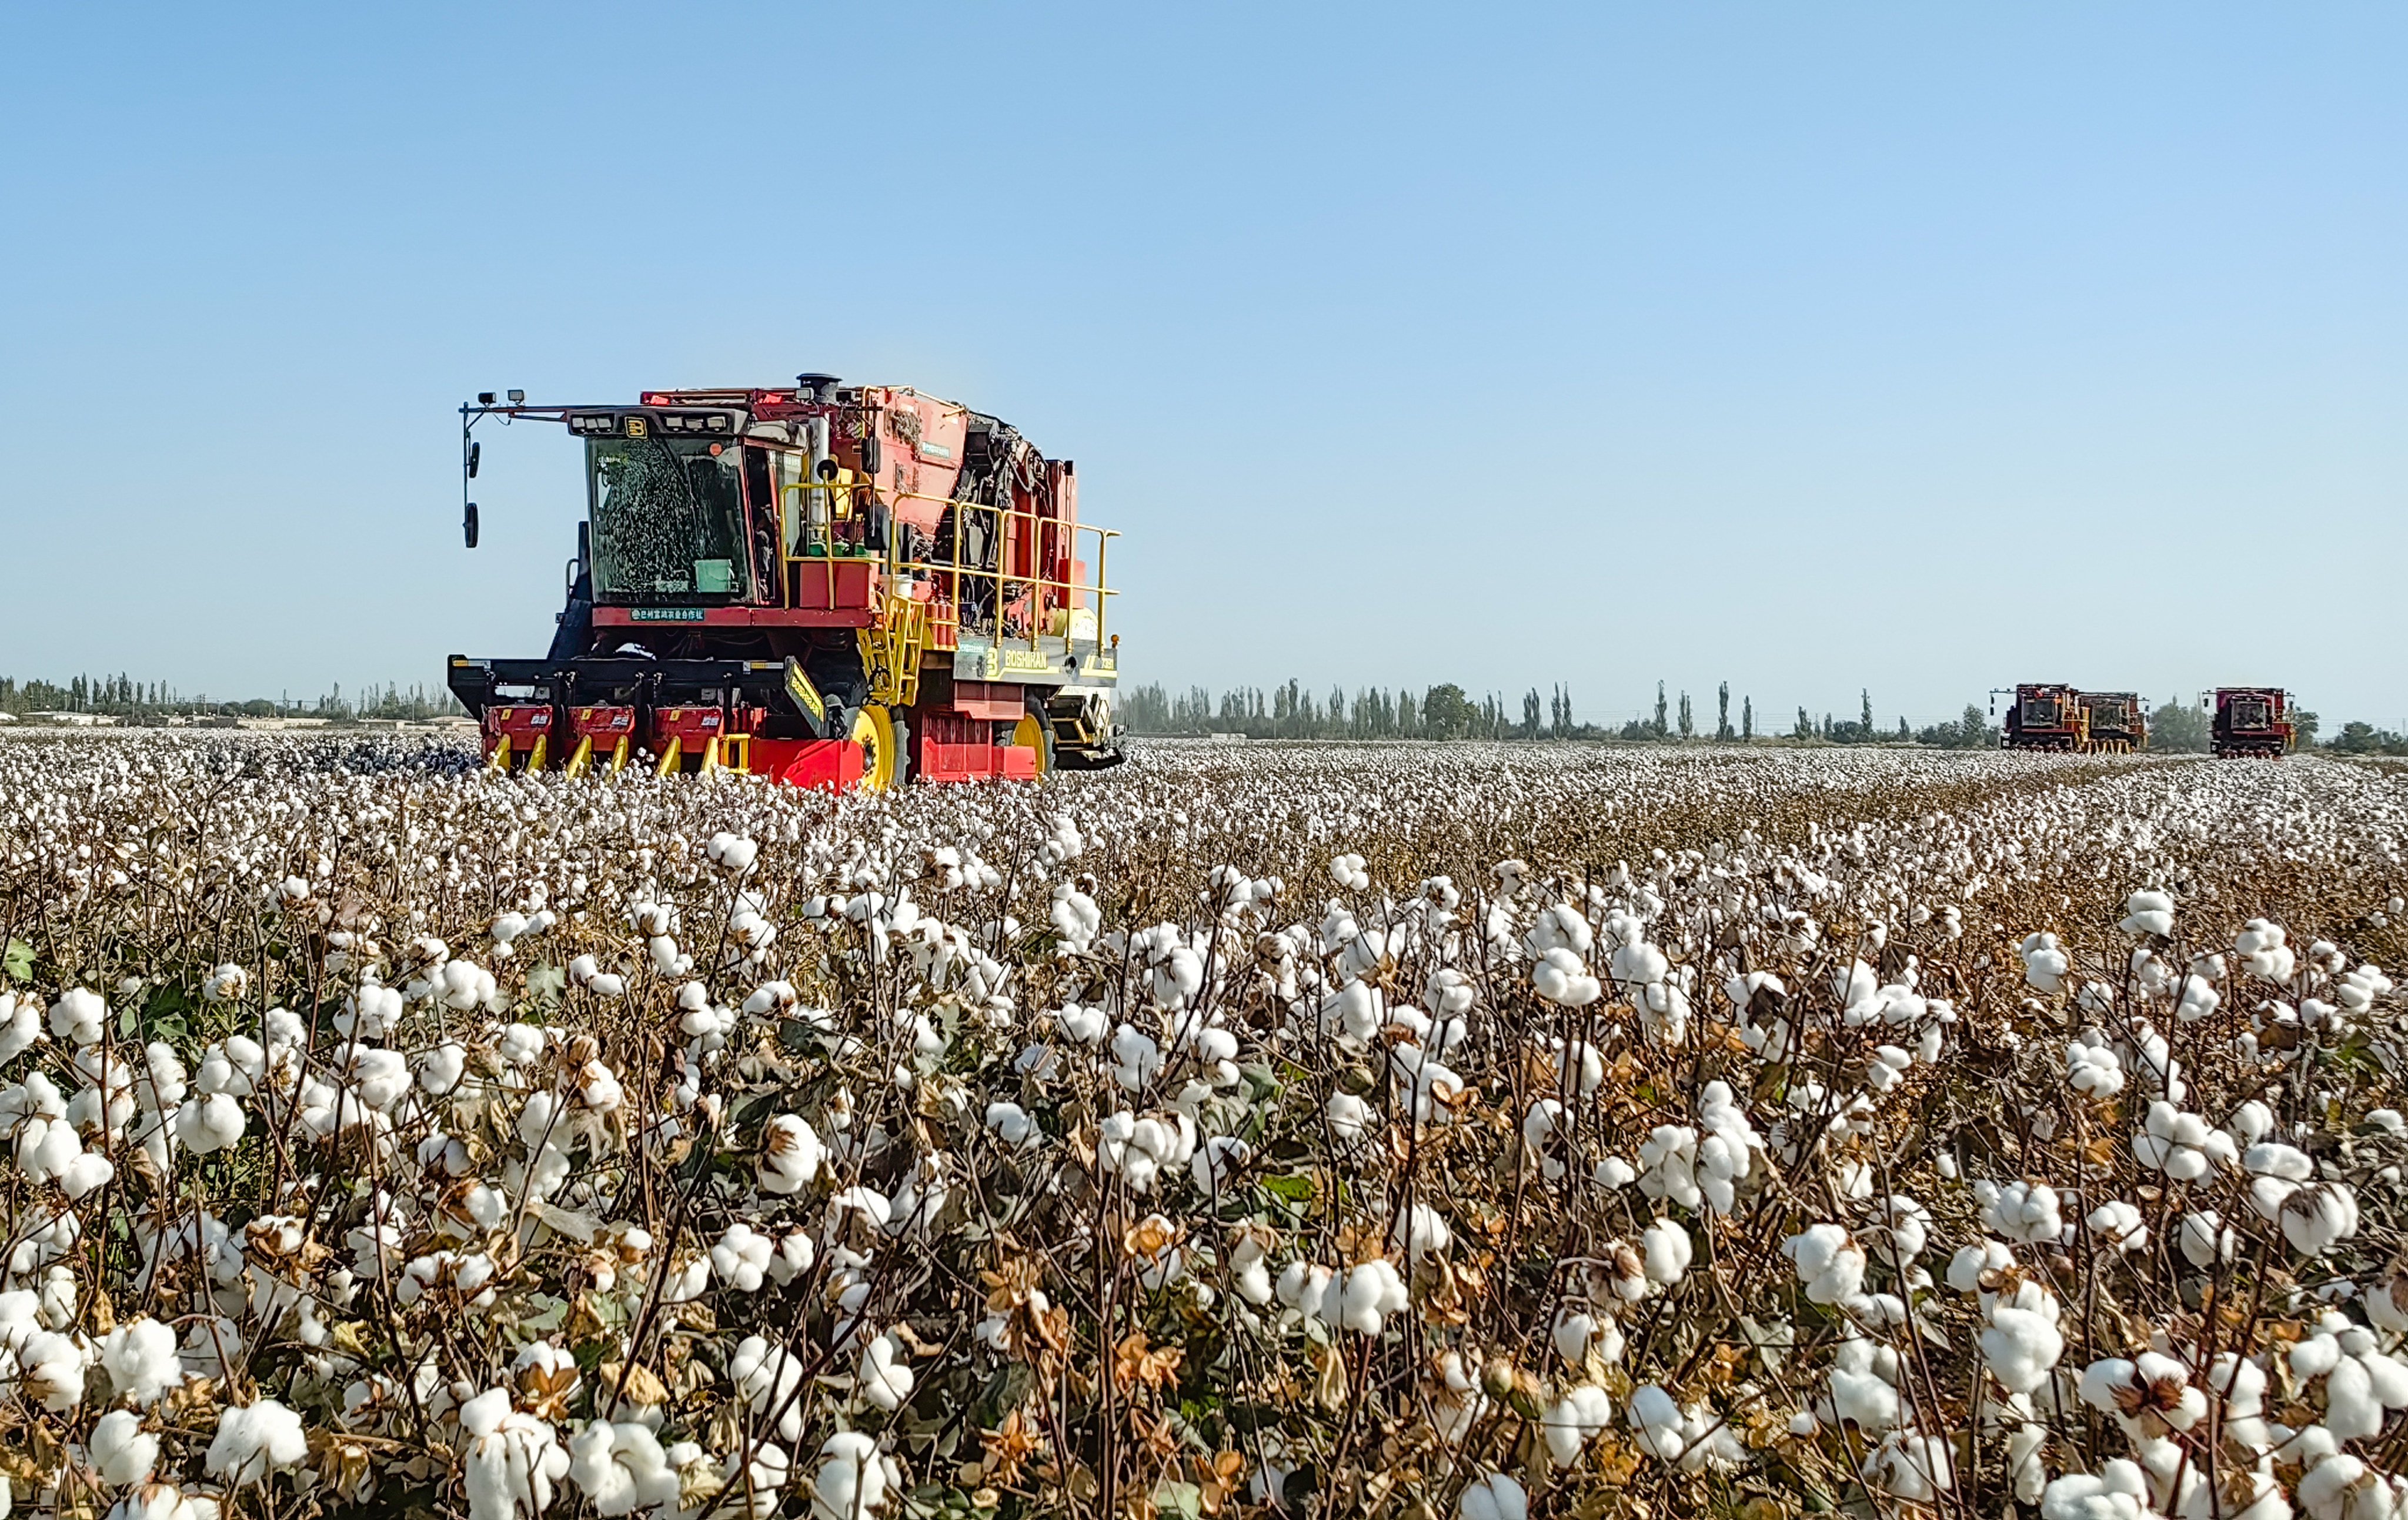 Farmers harvesting cotton in Korla in northwest China’s Xinjiang Uygur autonomous region in October. The EU has alleged that human rights abuses are taking place in Xinjiang. Photo: Xinhua